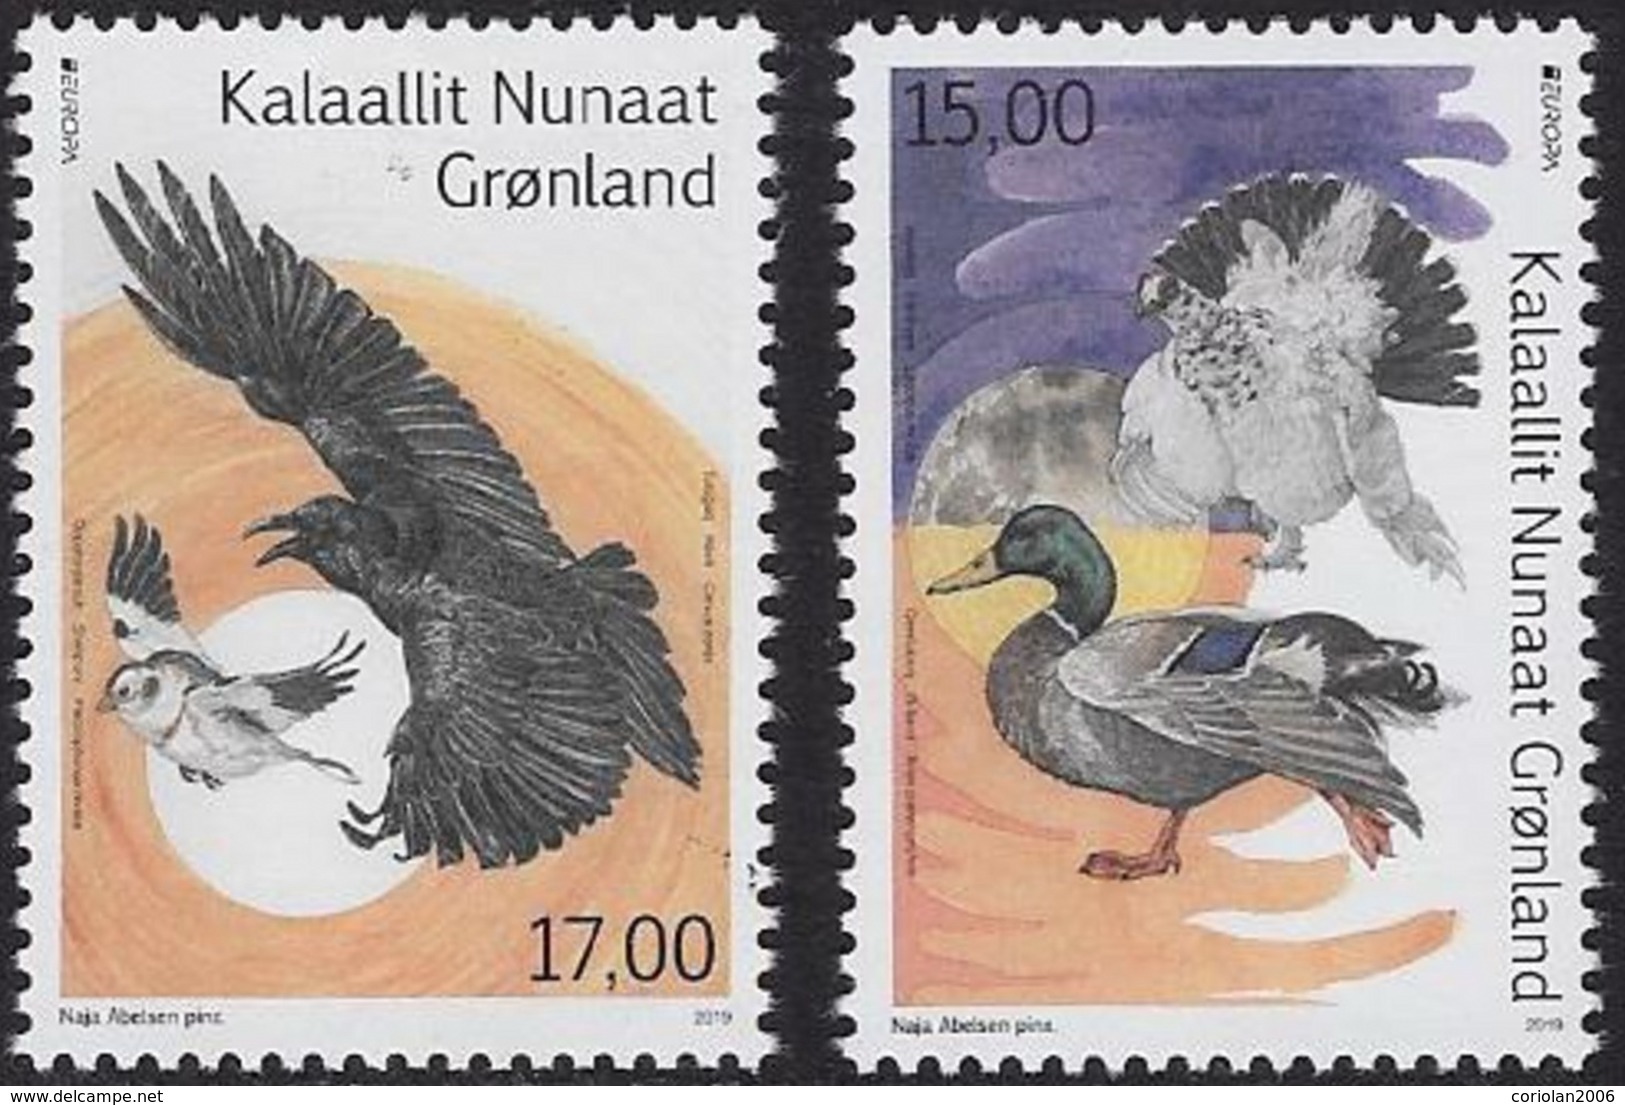 Europa 2019 / Greenland / Set 2 Stamps - 2019